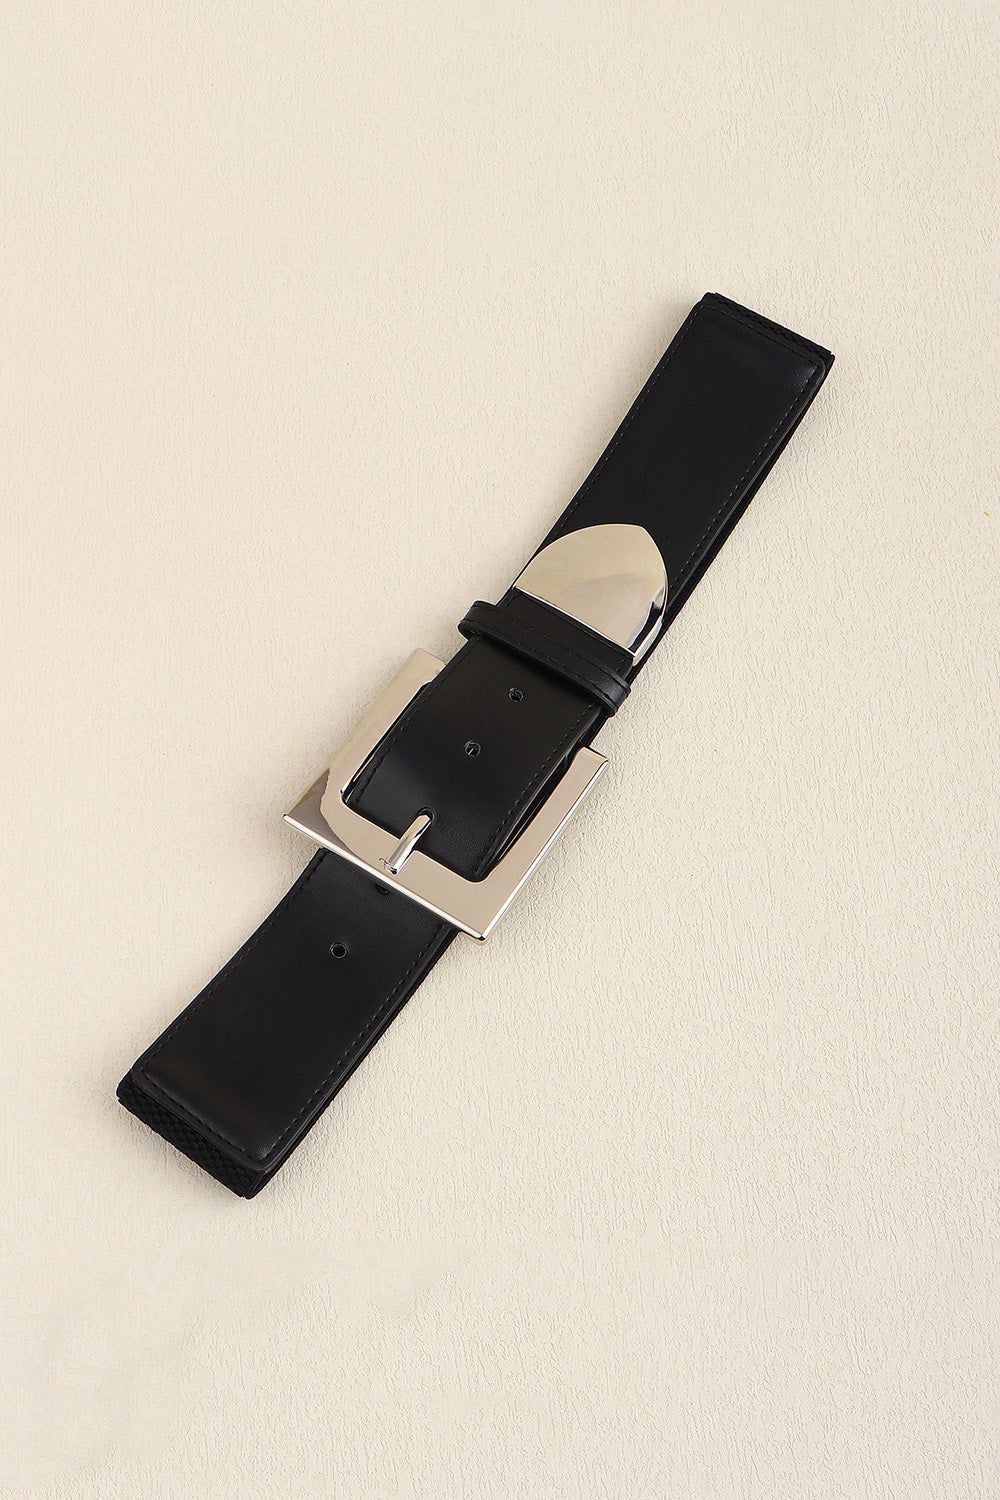 Zinc Alloy Buckle PU Leather Belt Print on any thing USA/STOD clothes